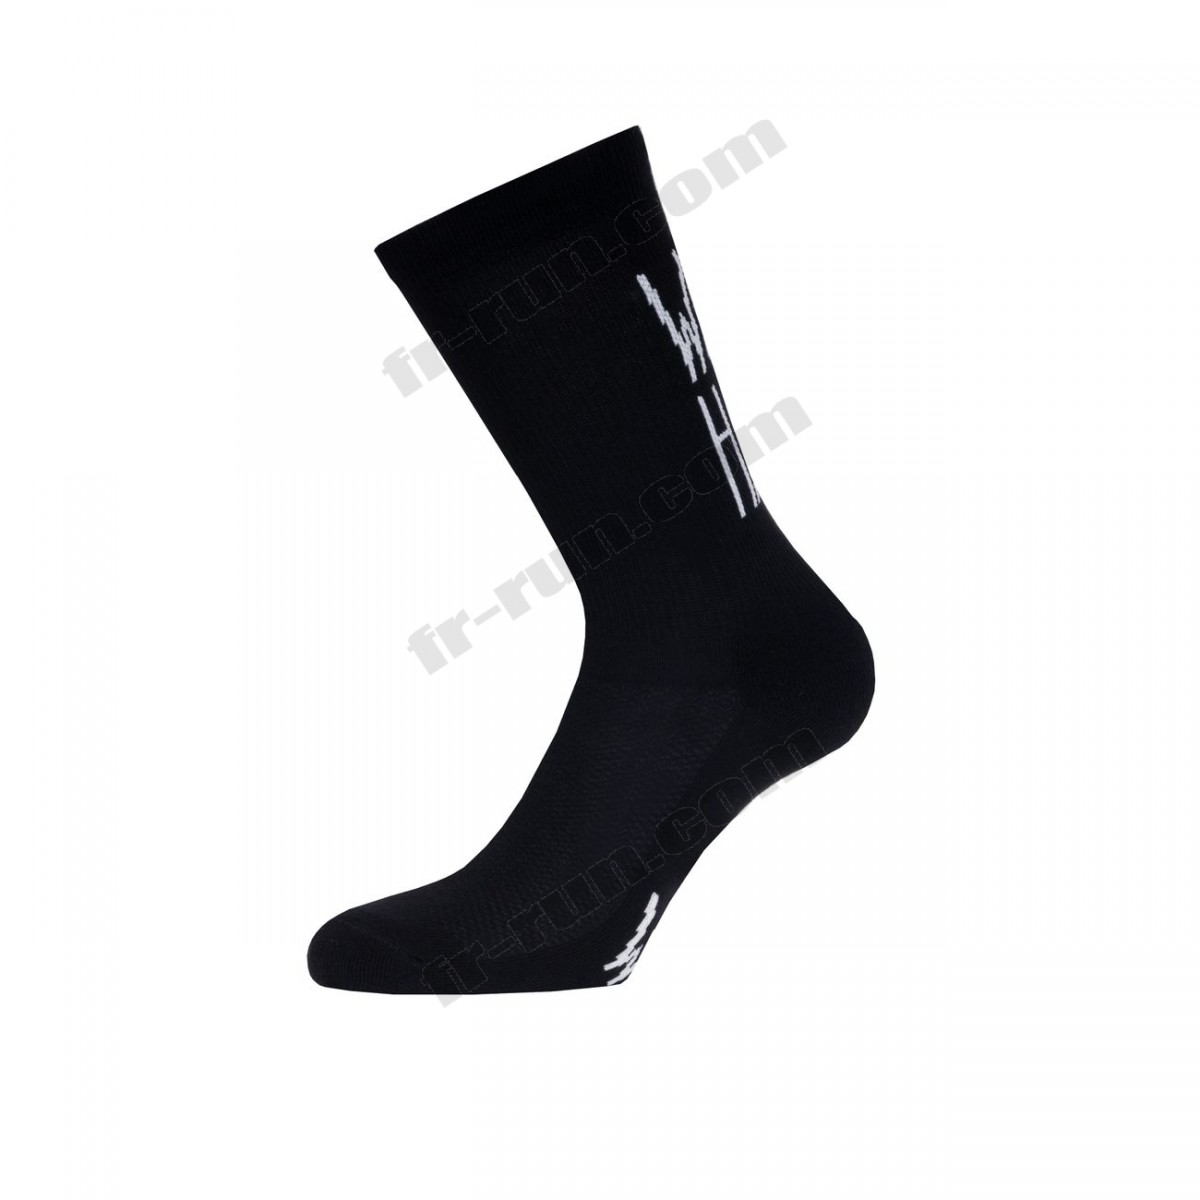 Pacific And Co/running adulte PACIFIC and CO WORK HARD Unisex Performance Socks ◇◇◇ Pas Cher Du Tout - -0